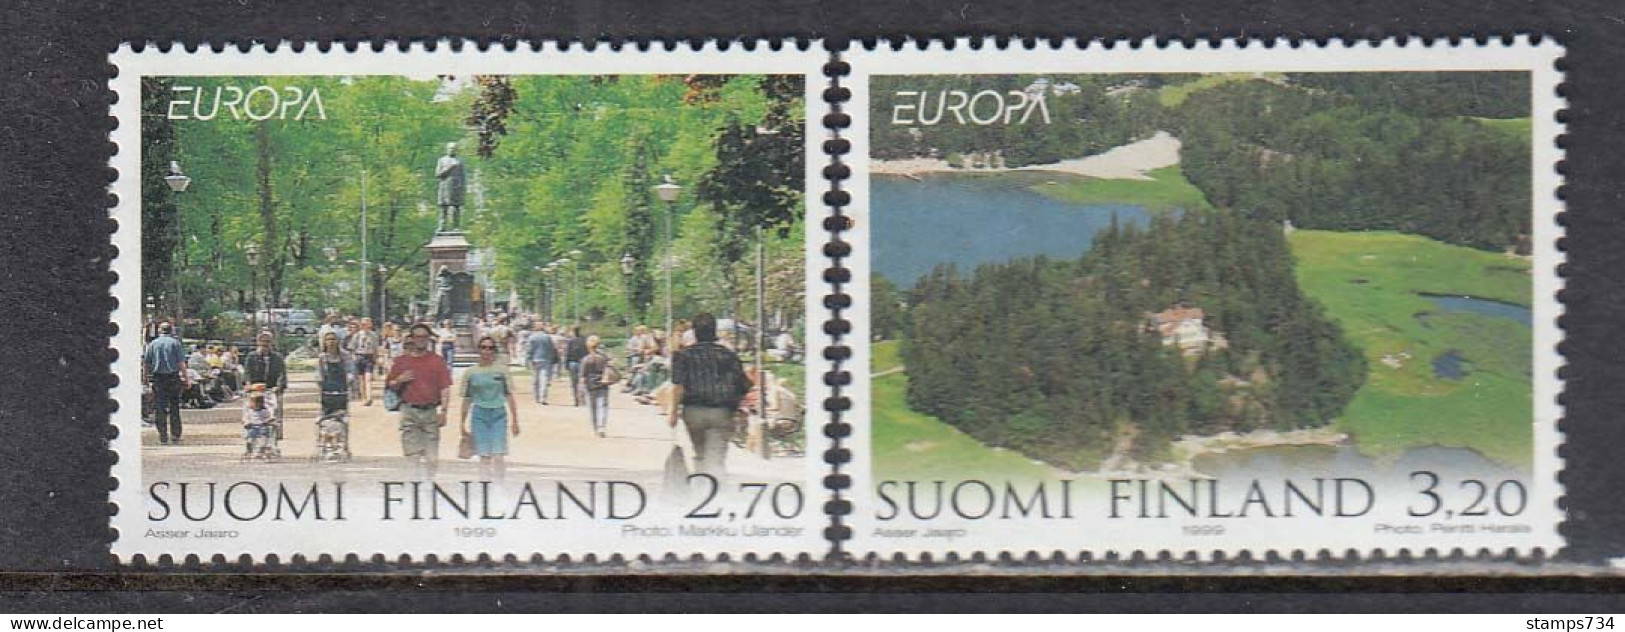 Finland 1999 - EUROPA: Nature And National Parks, Mi-Nr. 1474/75, MNH** - Nuovi